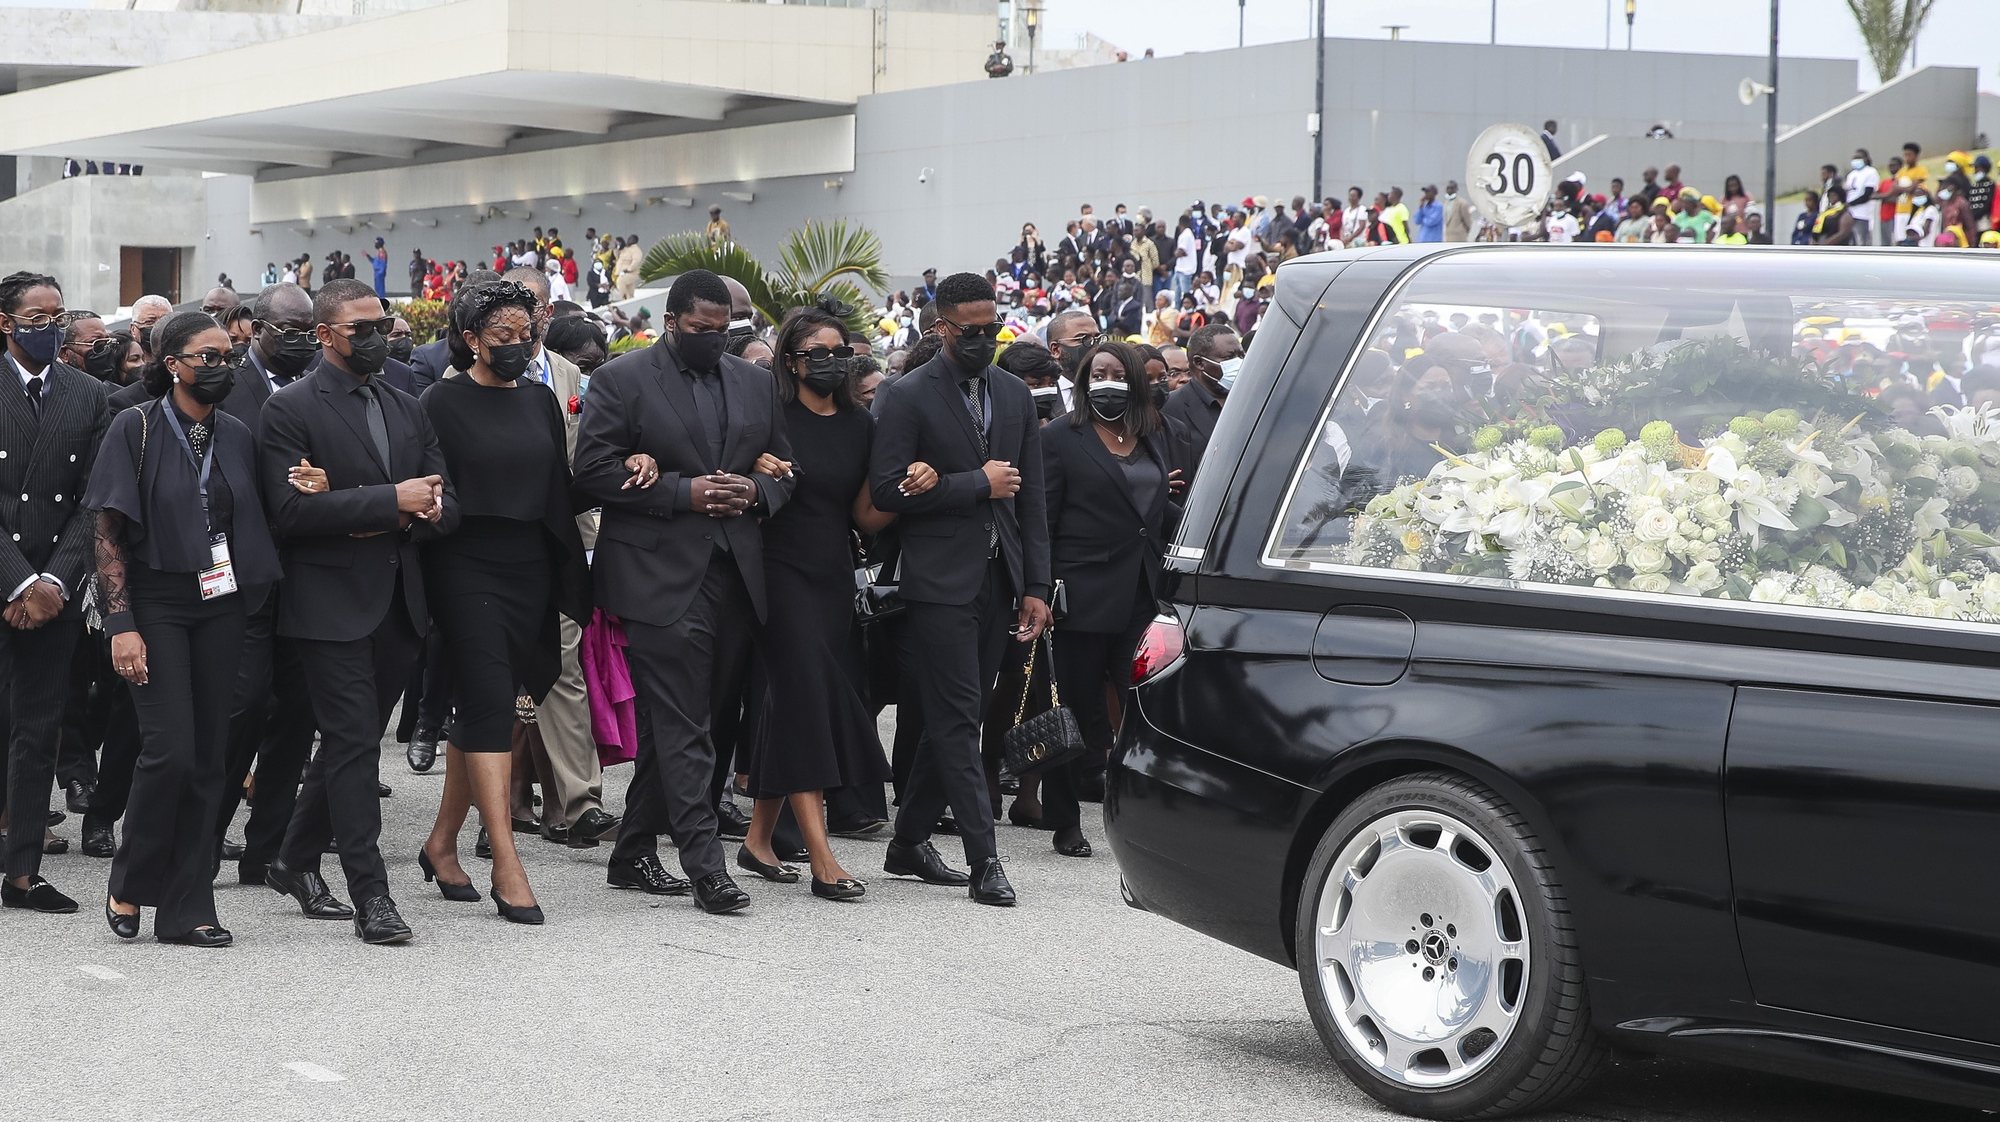 Funeral ceremonies of the former President of the Republic of Angola, José Eduardo dos Santos, at the António Agostinho Neto Memorial, Luanda, Angola, 28 August, 2022. Jose Eduardo dos Santos was President of Angola during 38 years and was also the commander-in-chief of the Angolan Armed Forces (FAA) and president of the People&#039;s Movement for the Liberation of Angola (MPLA), the party that has ruled Angola since it won independence in 1975. PAULO NOVAIS/LUSA